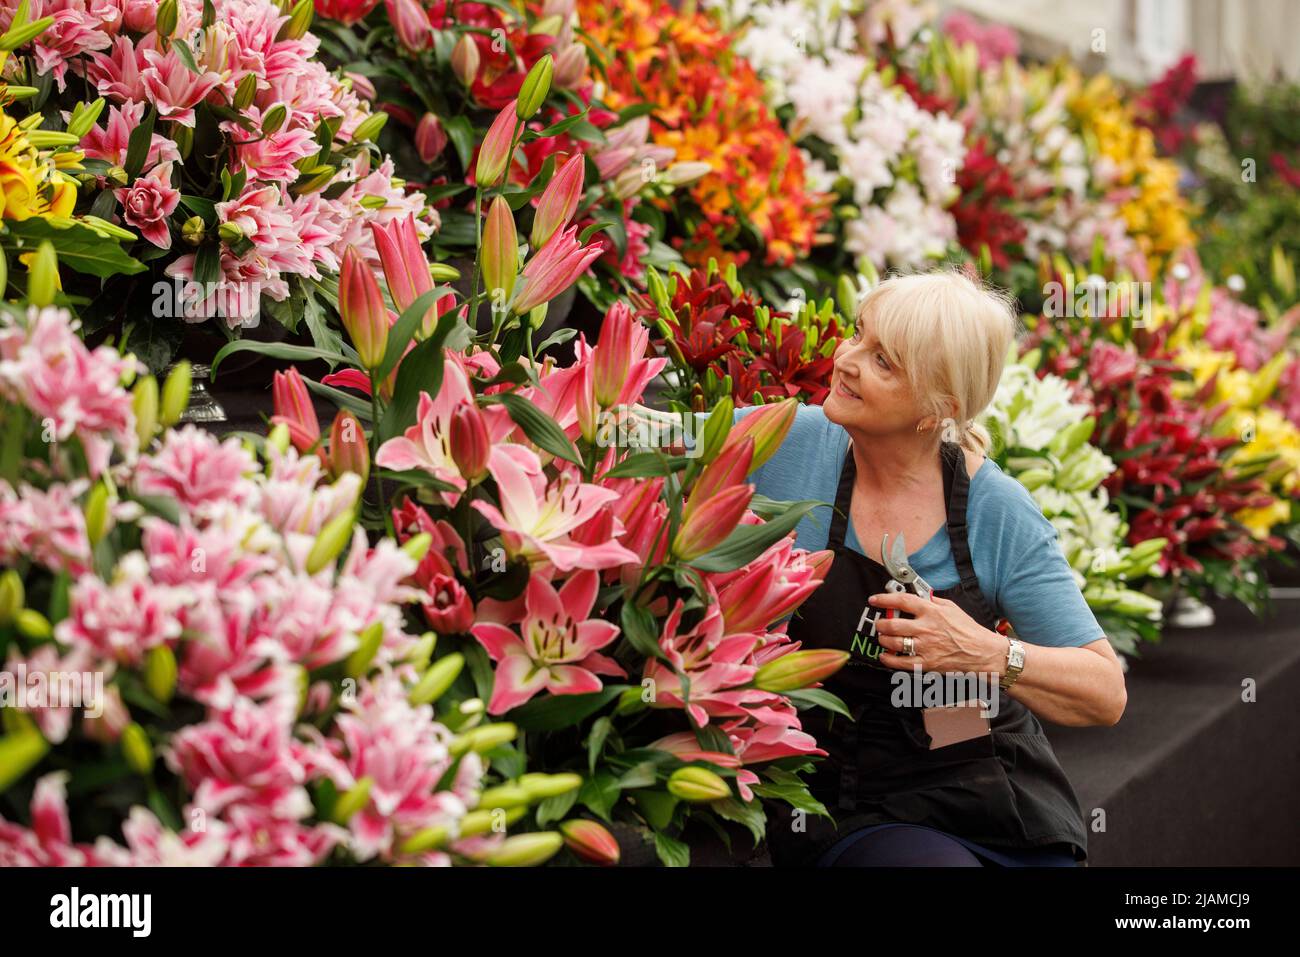 An Exhibitor tends to her lily display at the RHS Chelsea Flower Show. Stock Photo